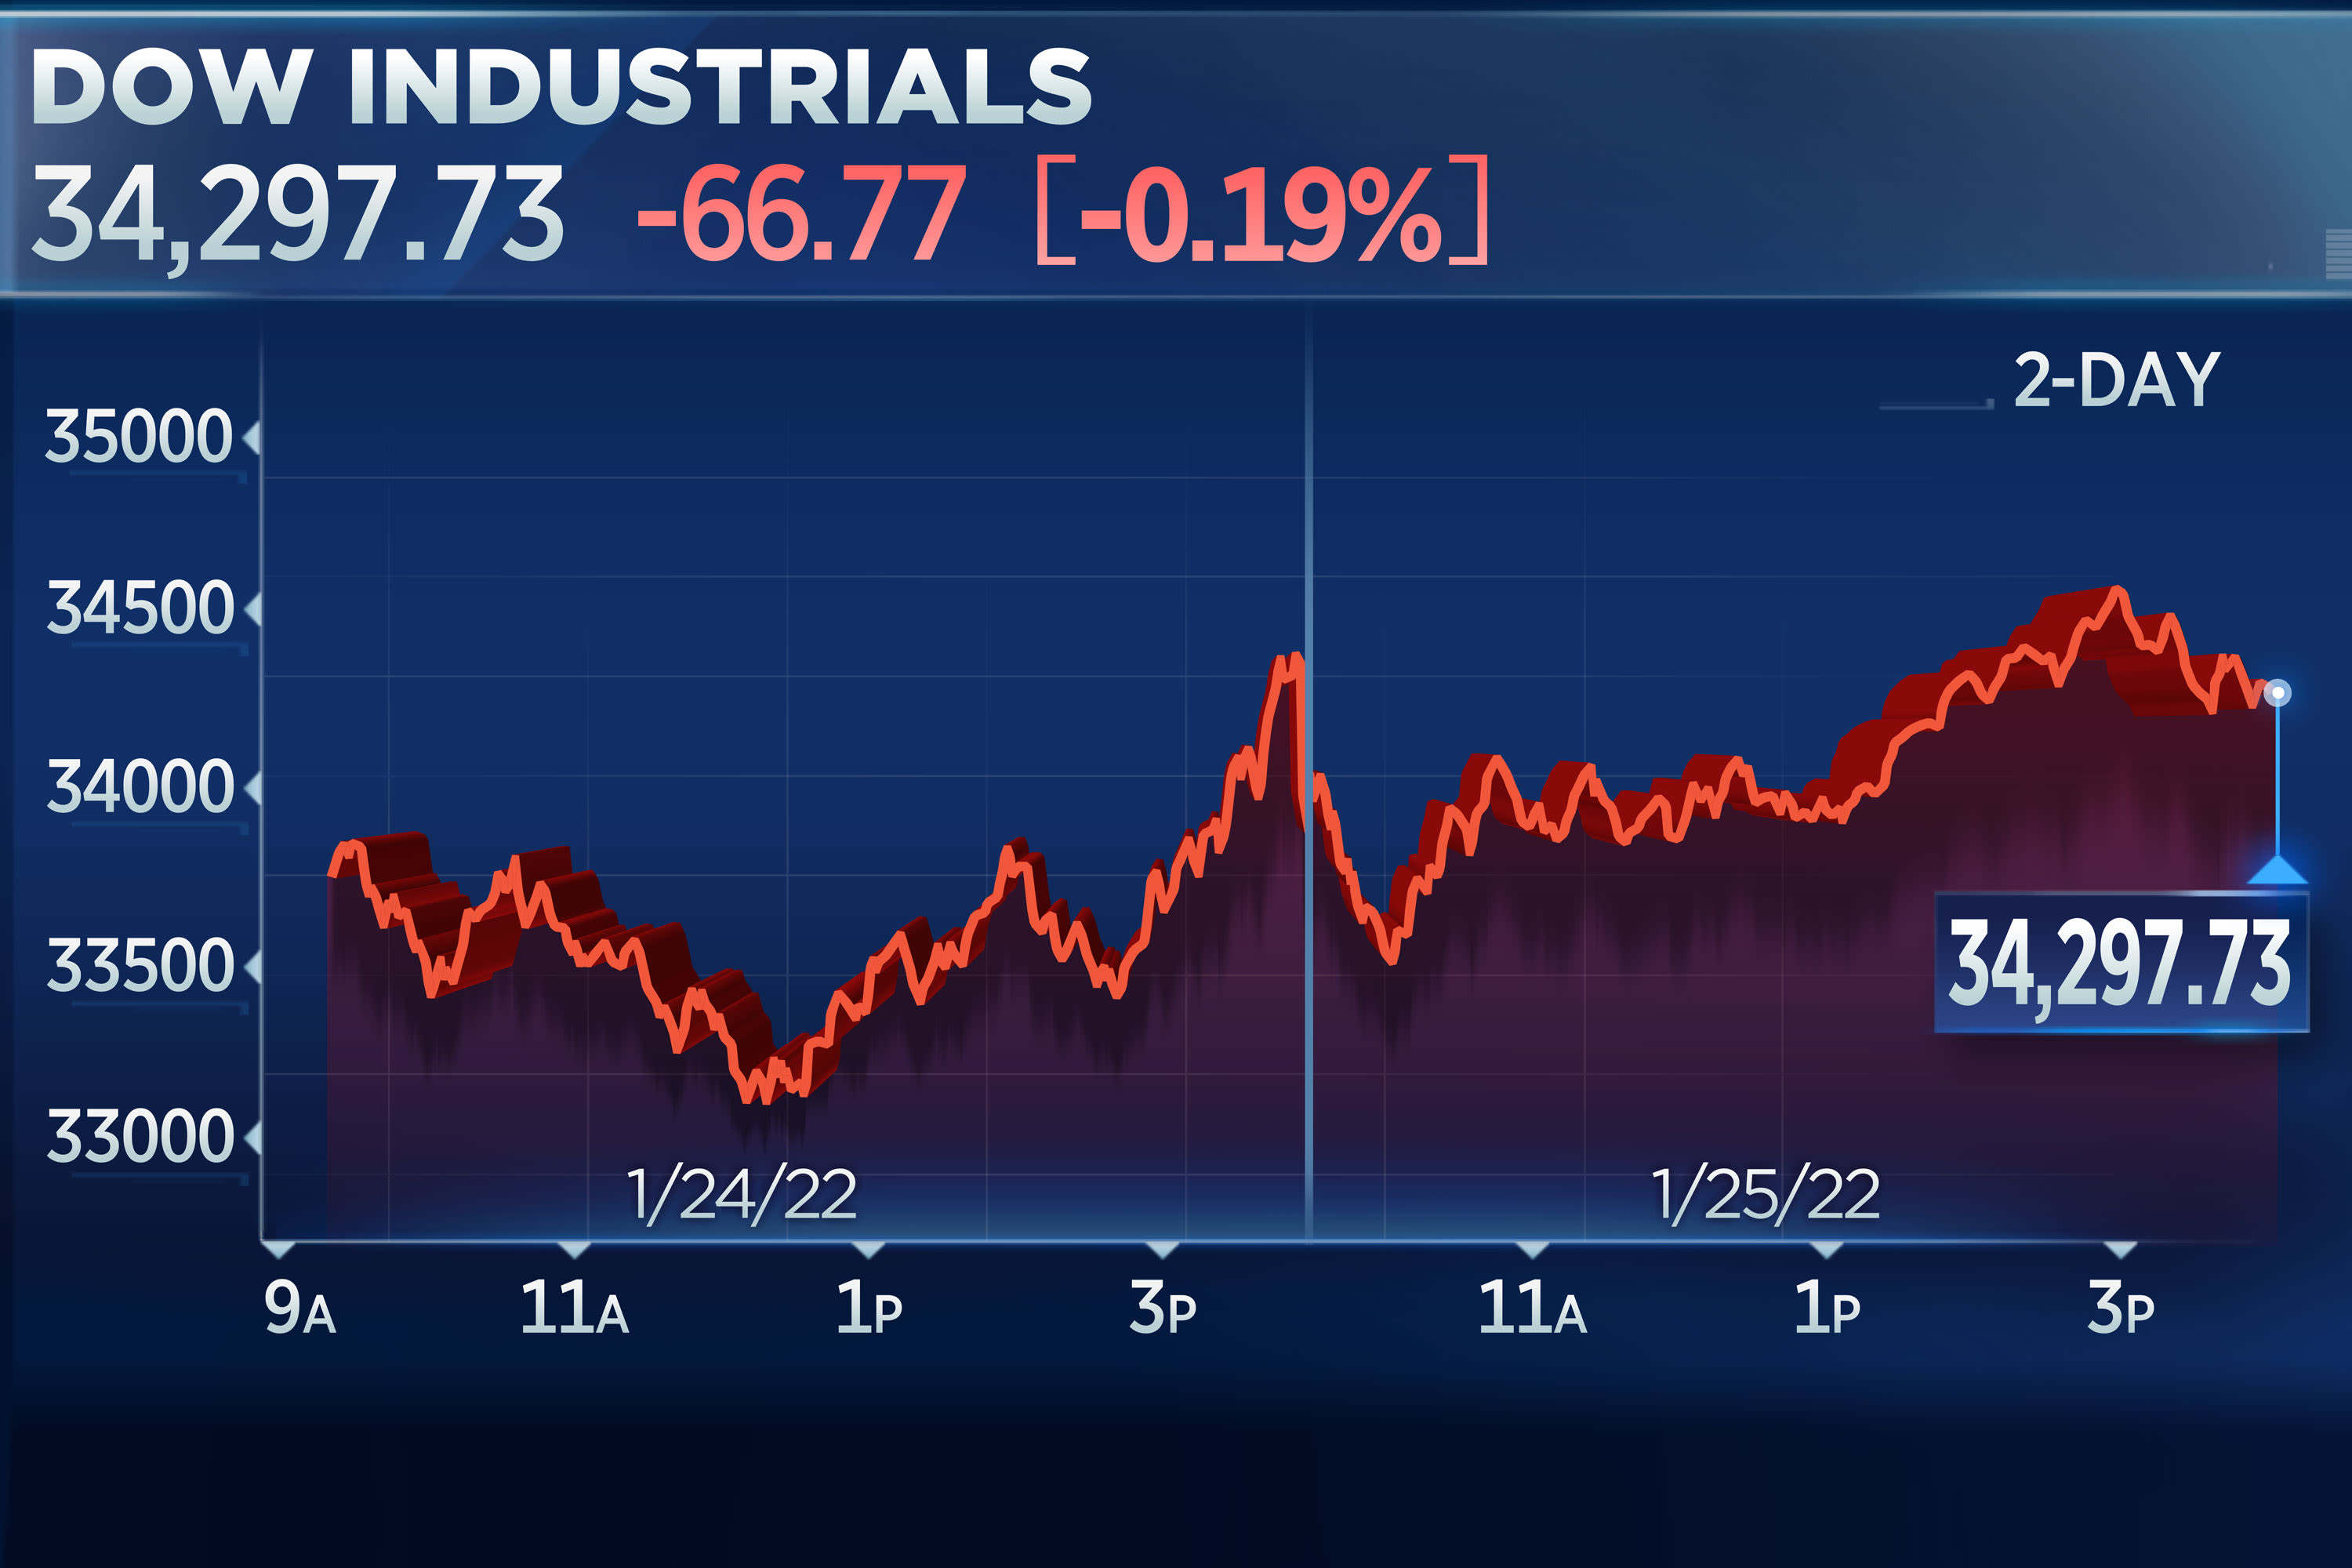 Dow falls more than 400 points, Nasdaq sheds 2.5% as January wild trading continues